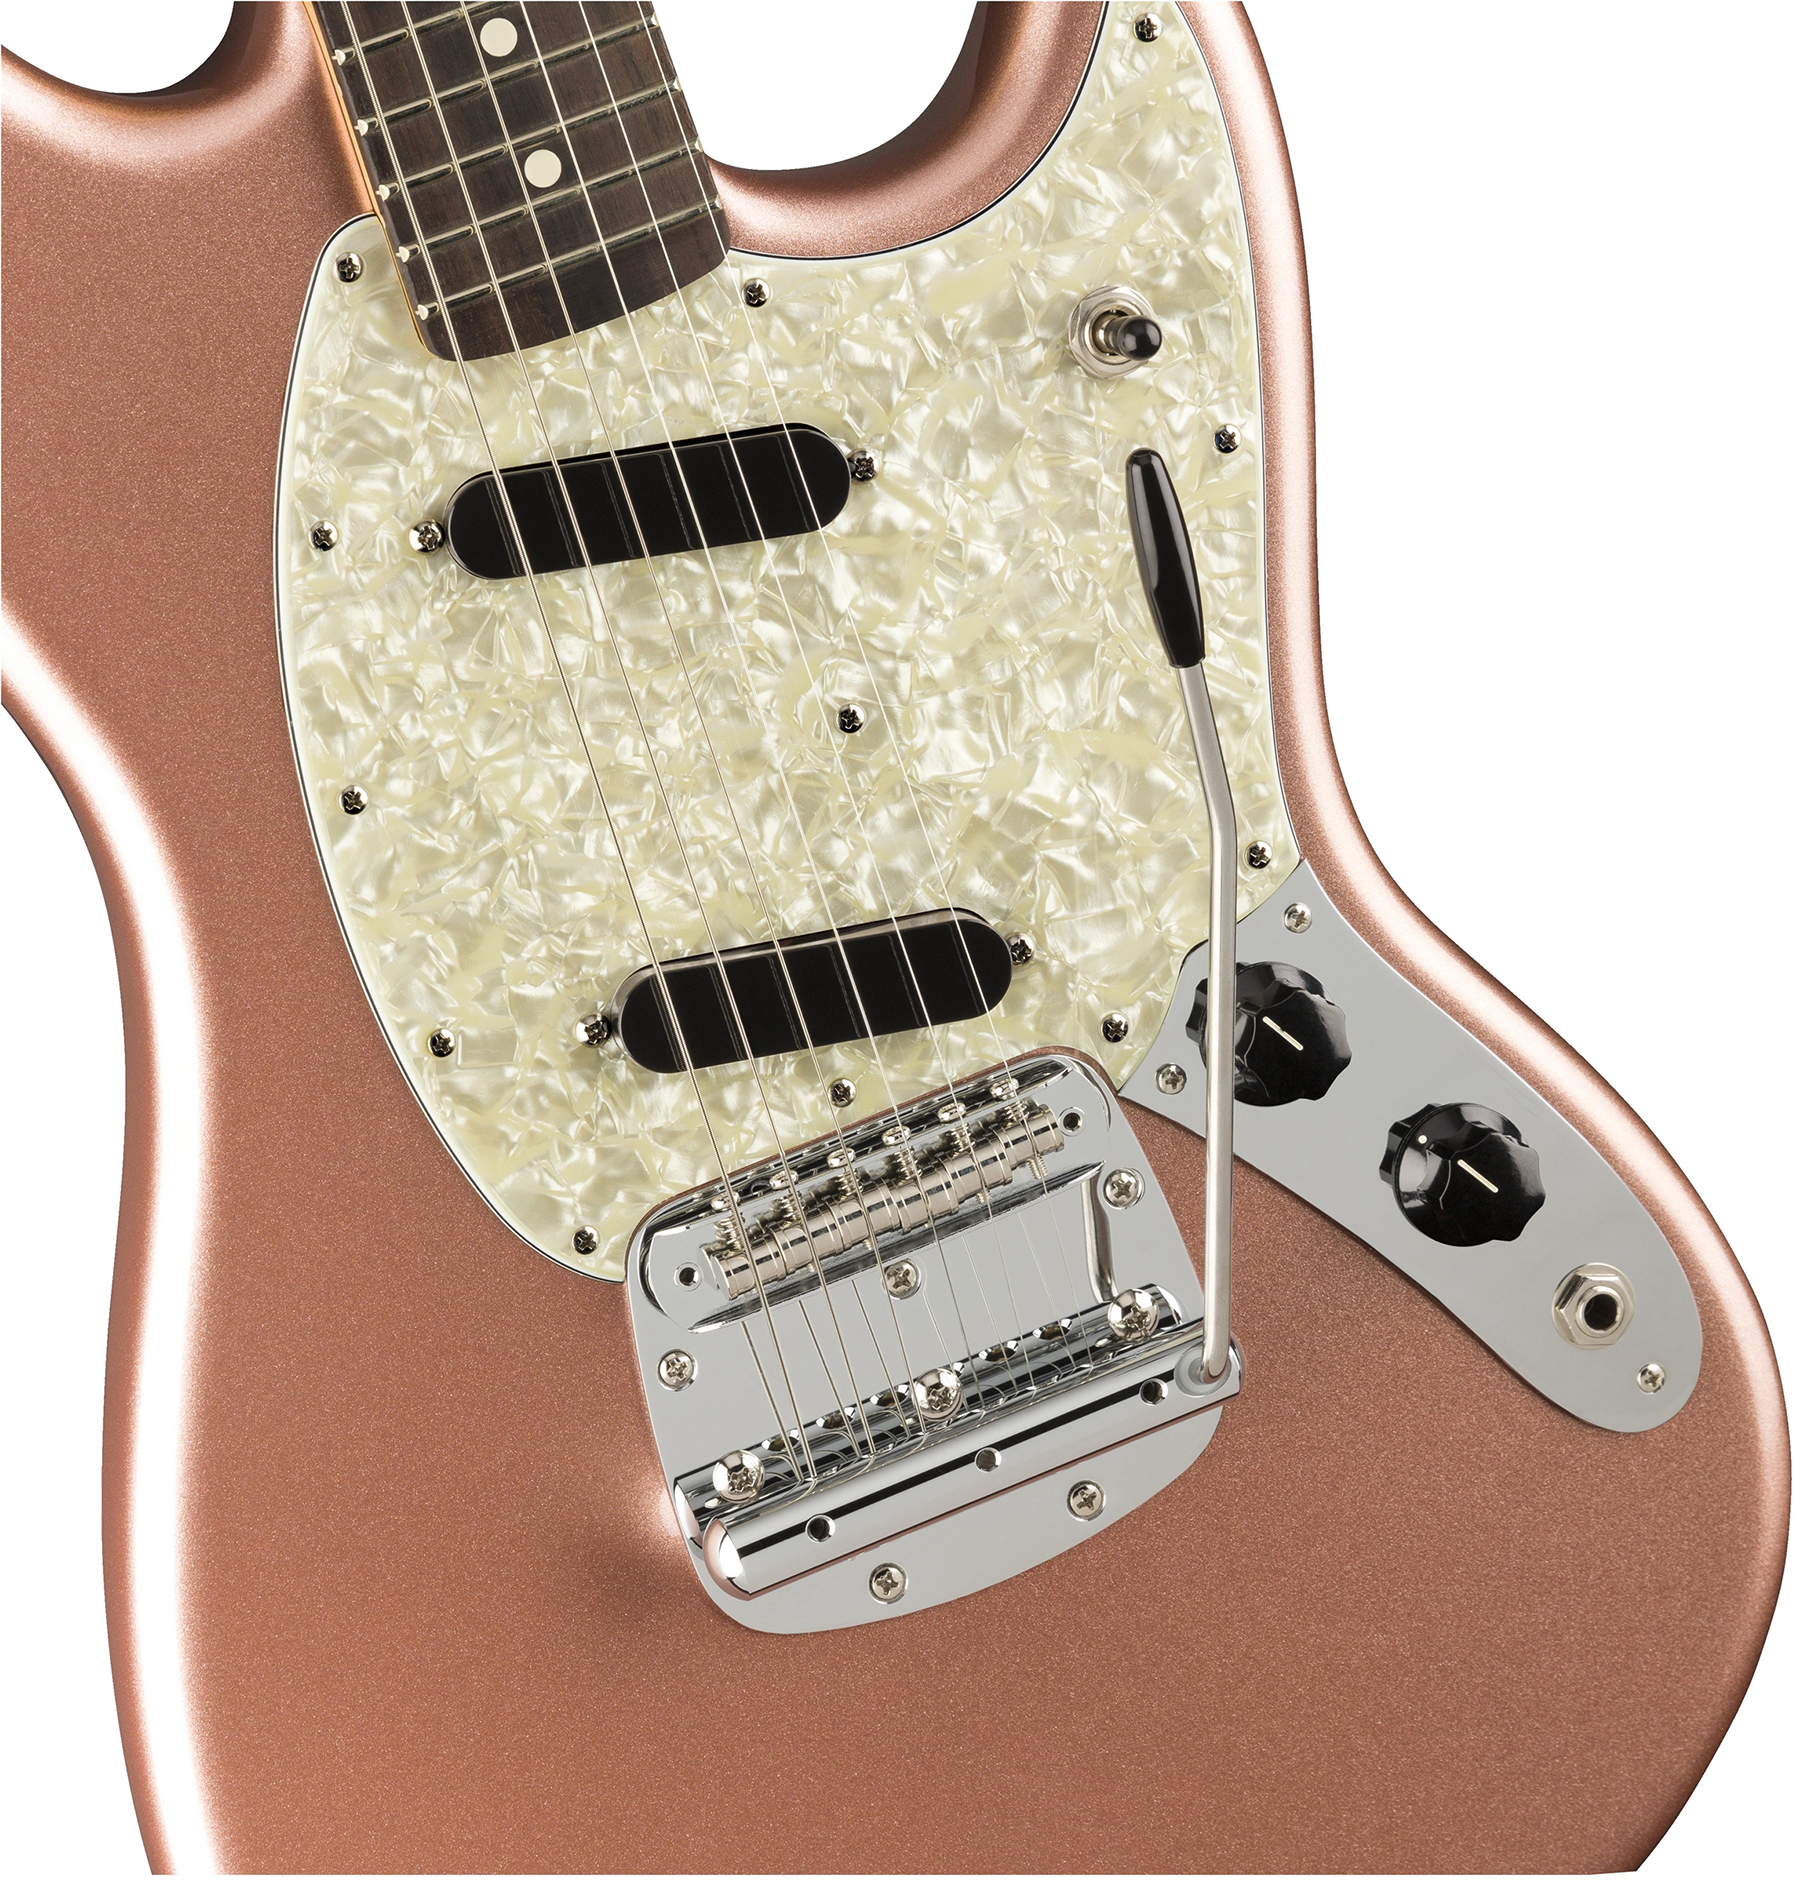 Fender Mustang American Performer Usa Ss Rw - Penny - Guitare Électrique Double Cut - Variation 2